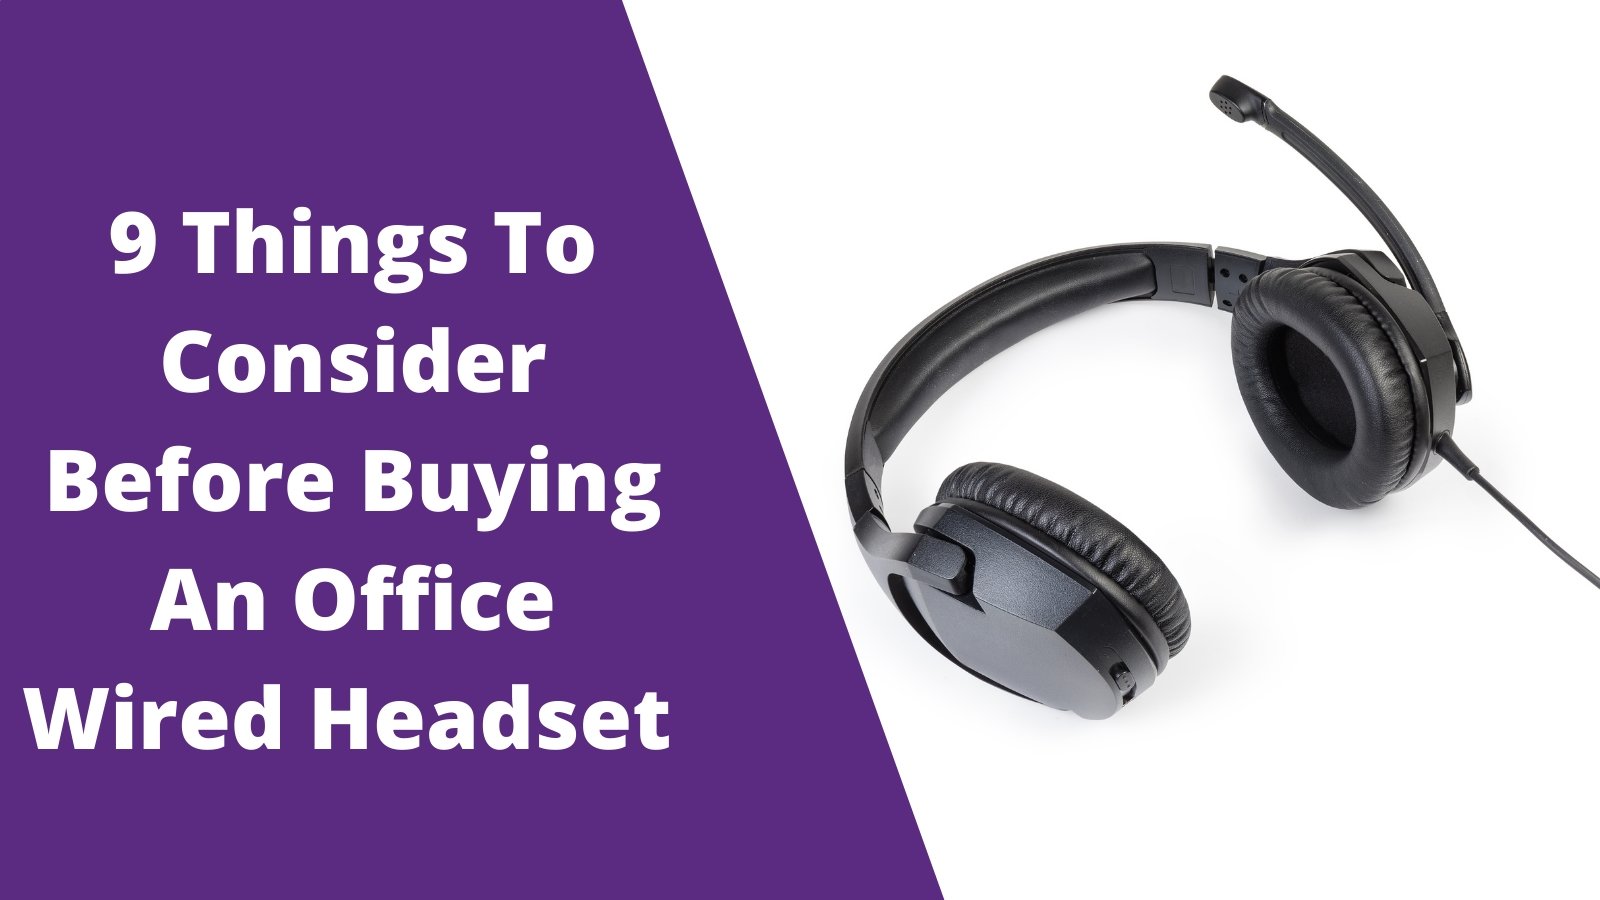 9 Things To Consider Before Buying An Office Wired Headset - Headset Advisor